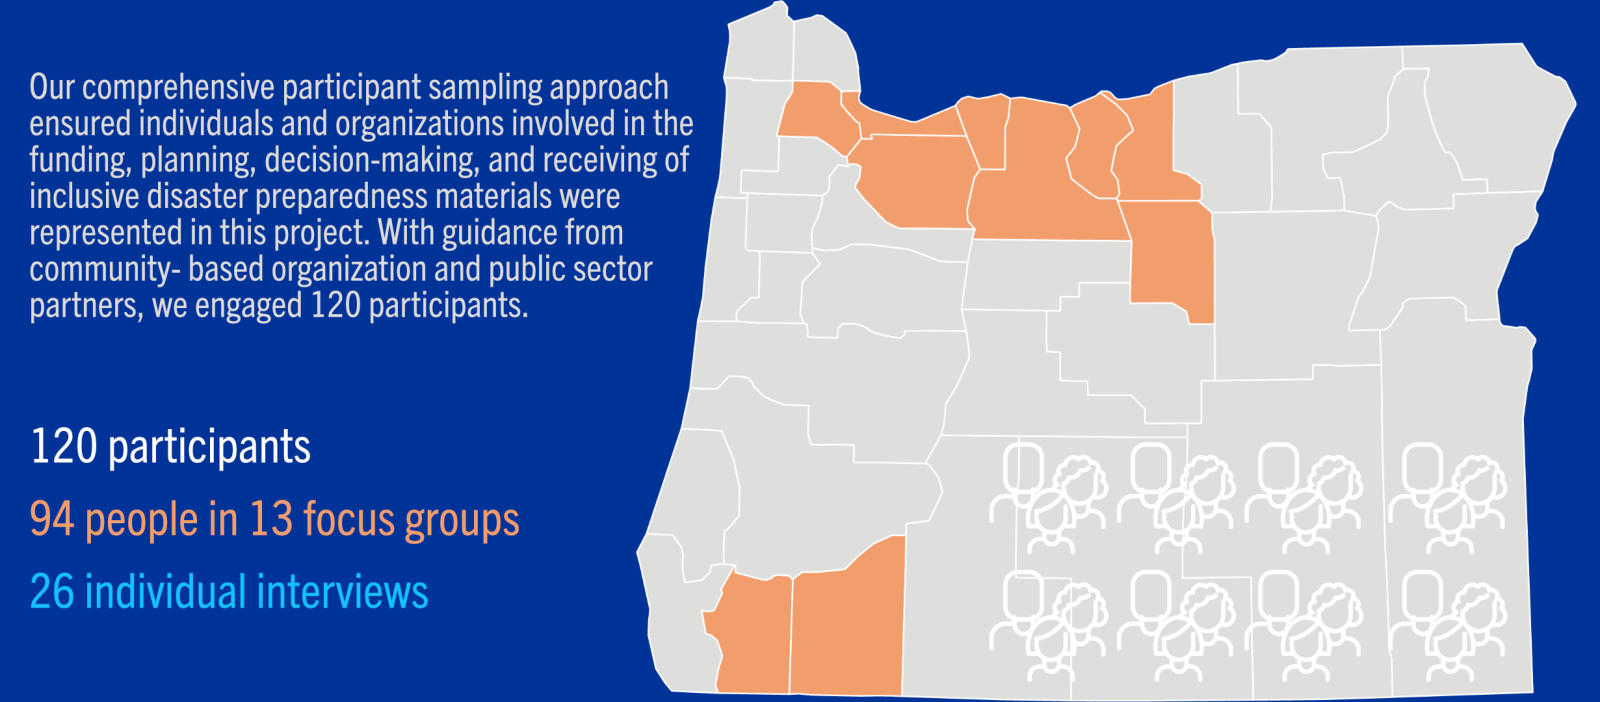 A photo of Oregon and the counties affected by this initiative with the text Our comprehensive participant sampling approach ensured individuals and organizations involved in the funding, planning, decision-making, and receiving of inclusive disaster preparedness materials were represented in this project. With guidance from community- based organization and public sector partners, we engaged 120 participants